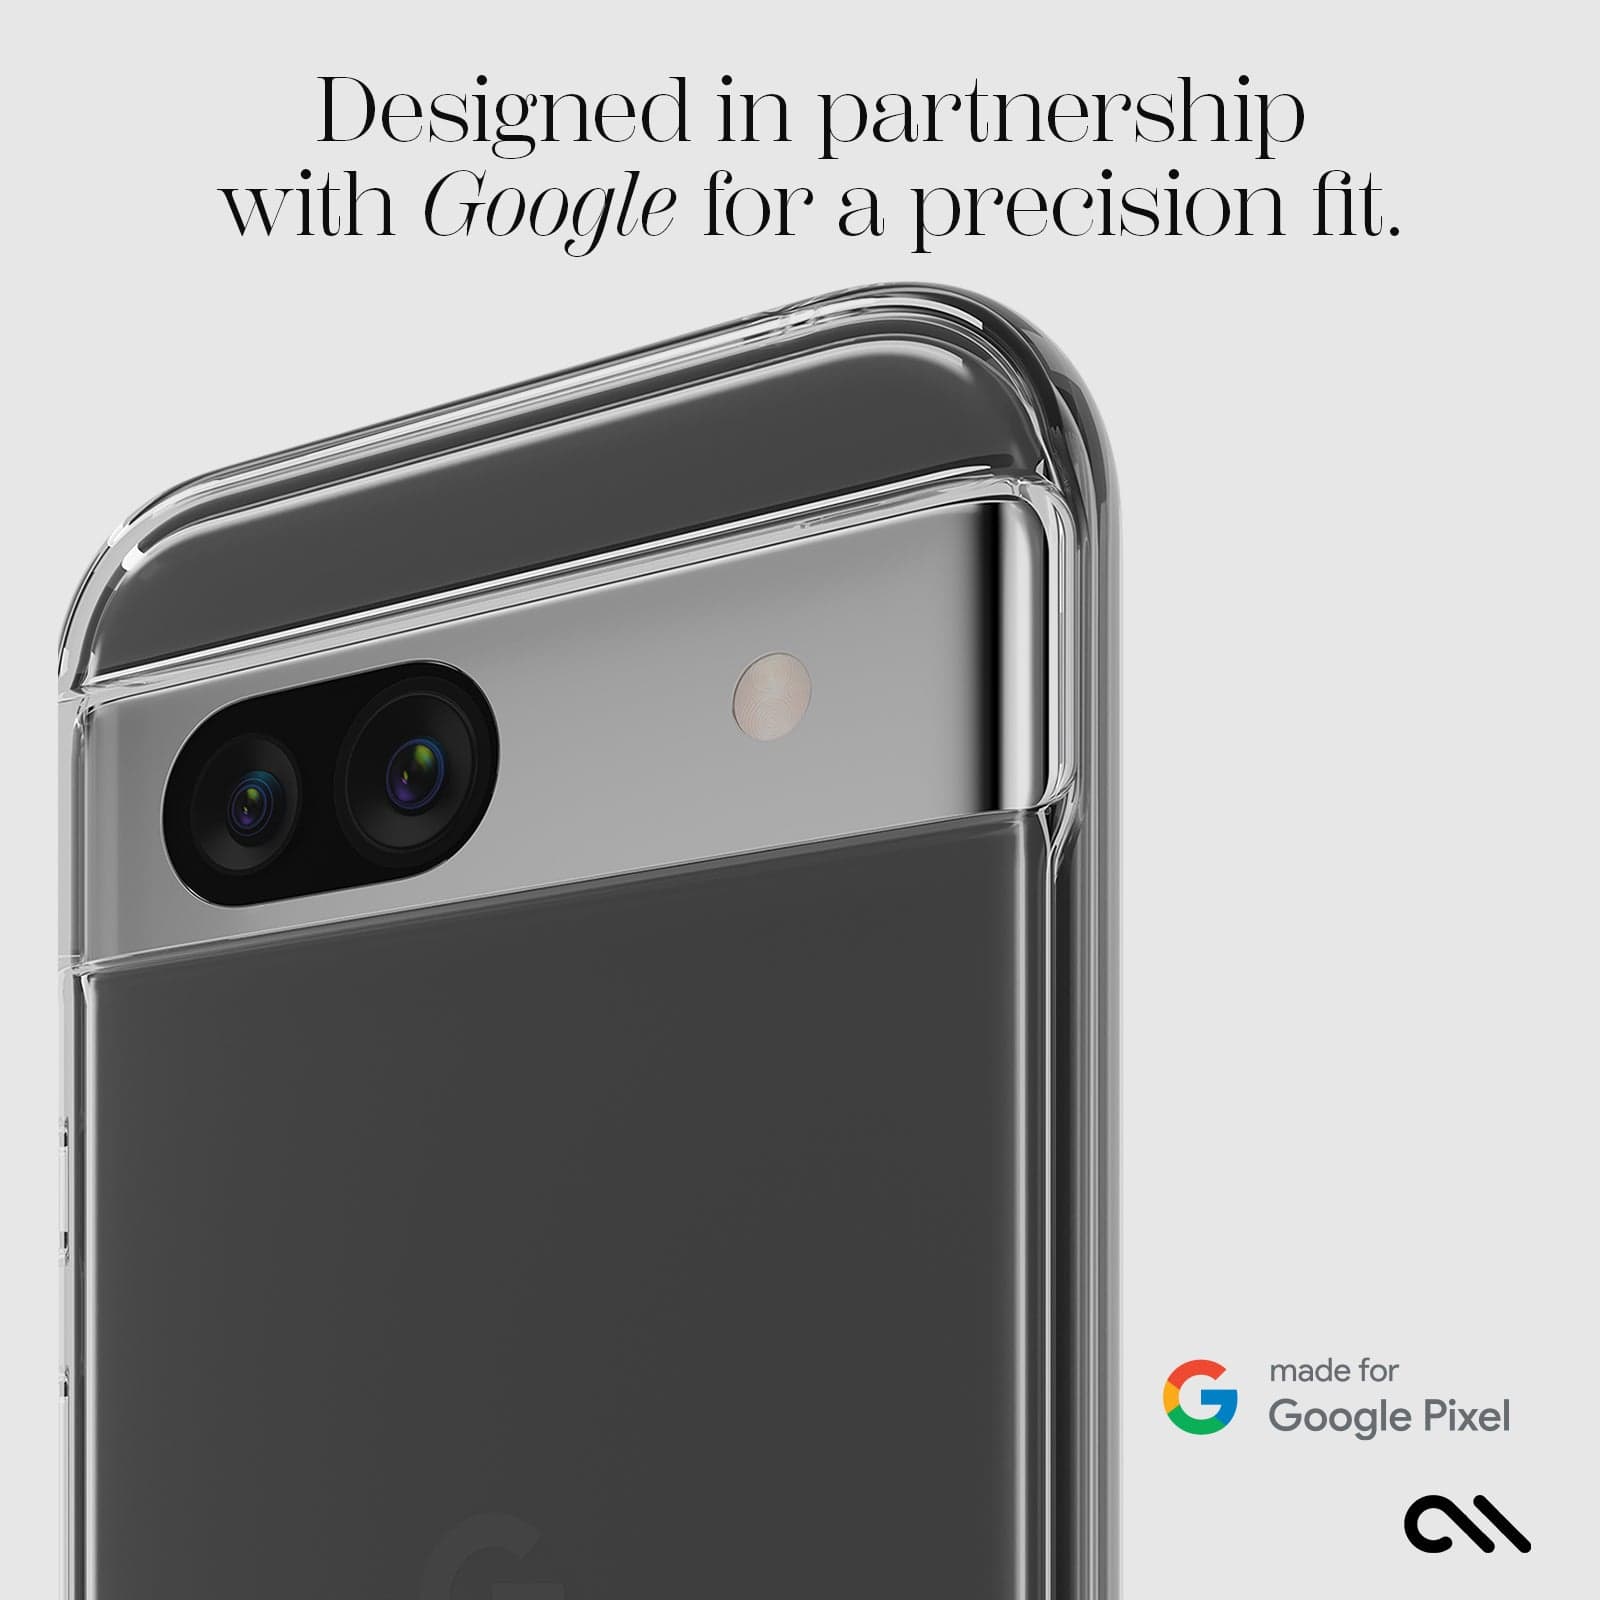 designed in partnership with Google for precision fit